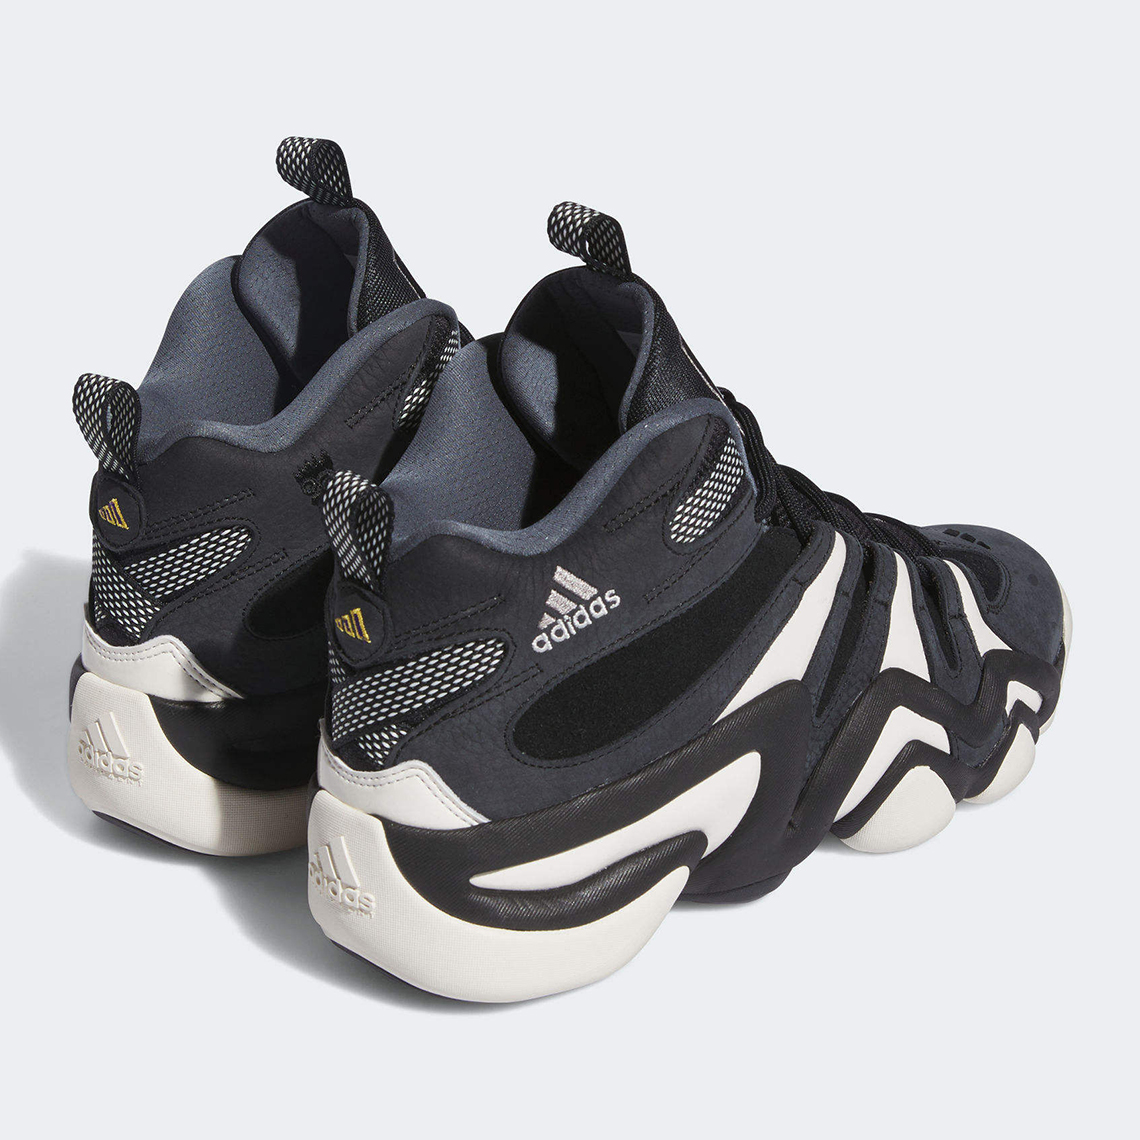 Adidas Crazy 8 Black White If2448 Release Date 4